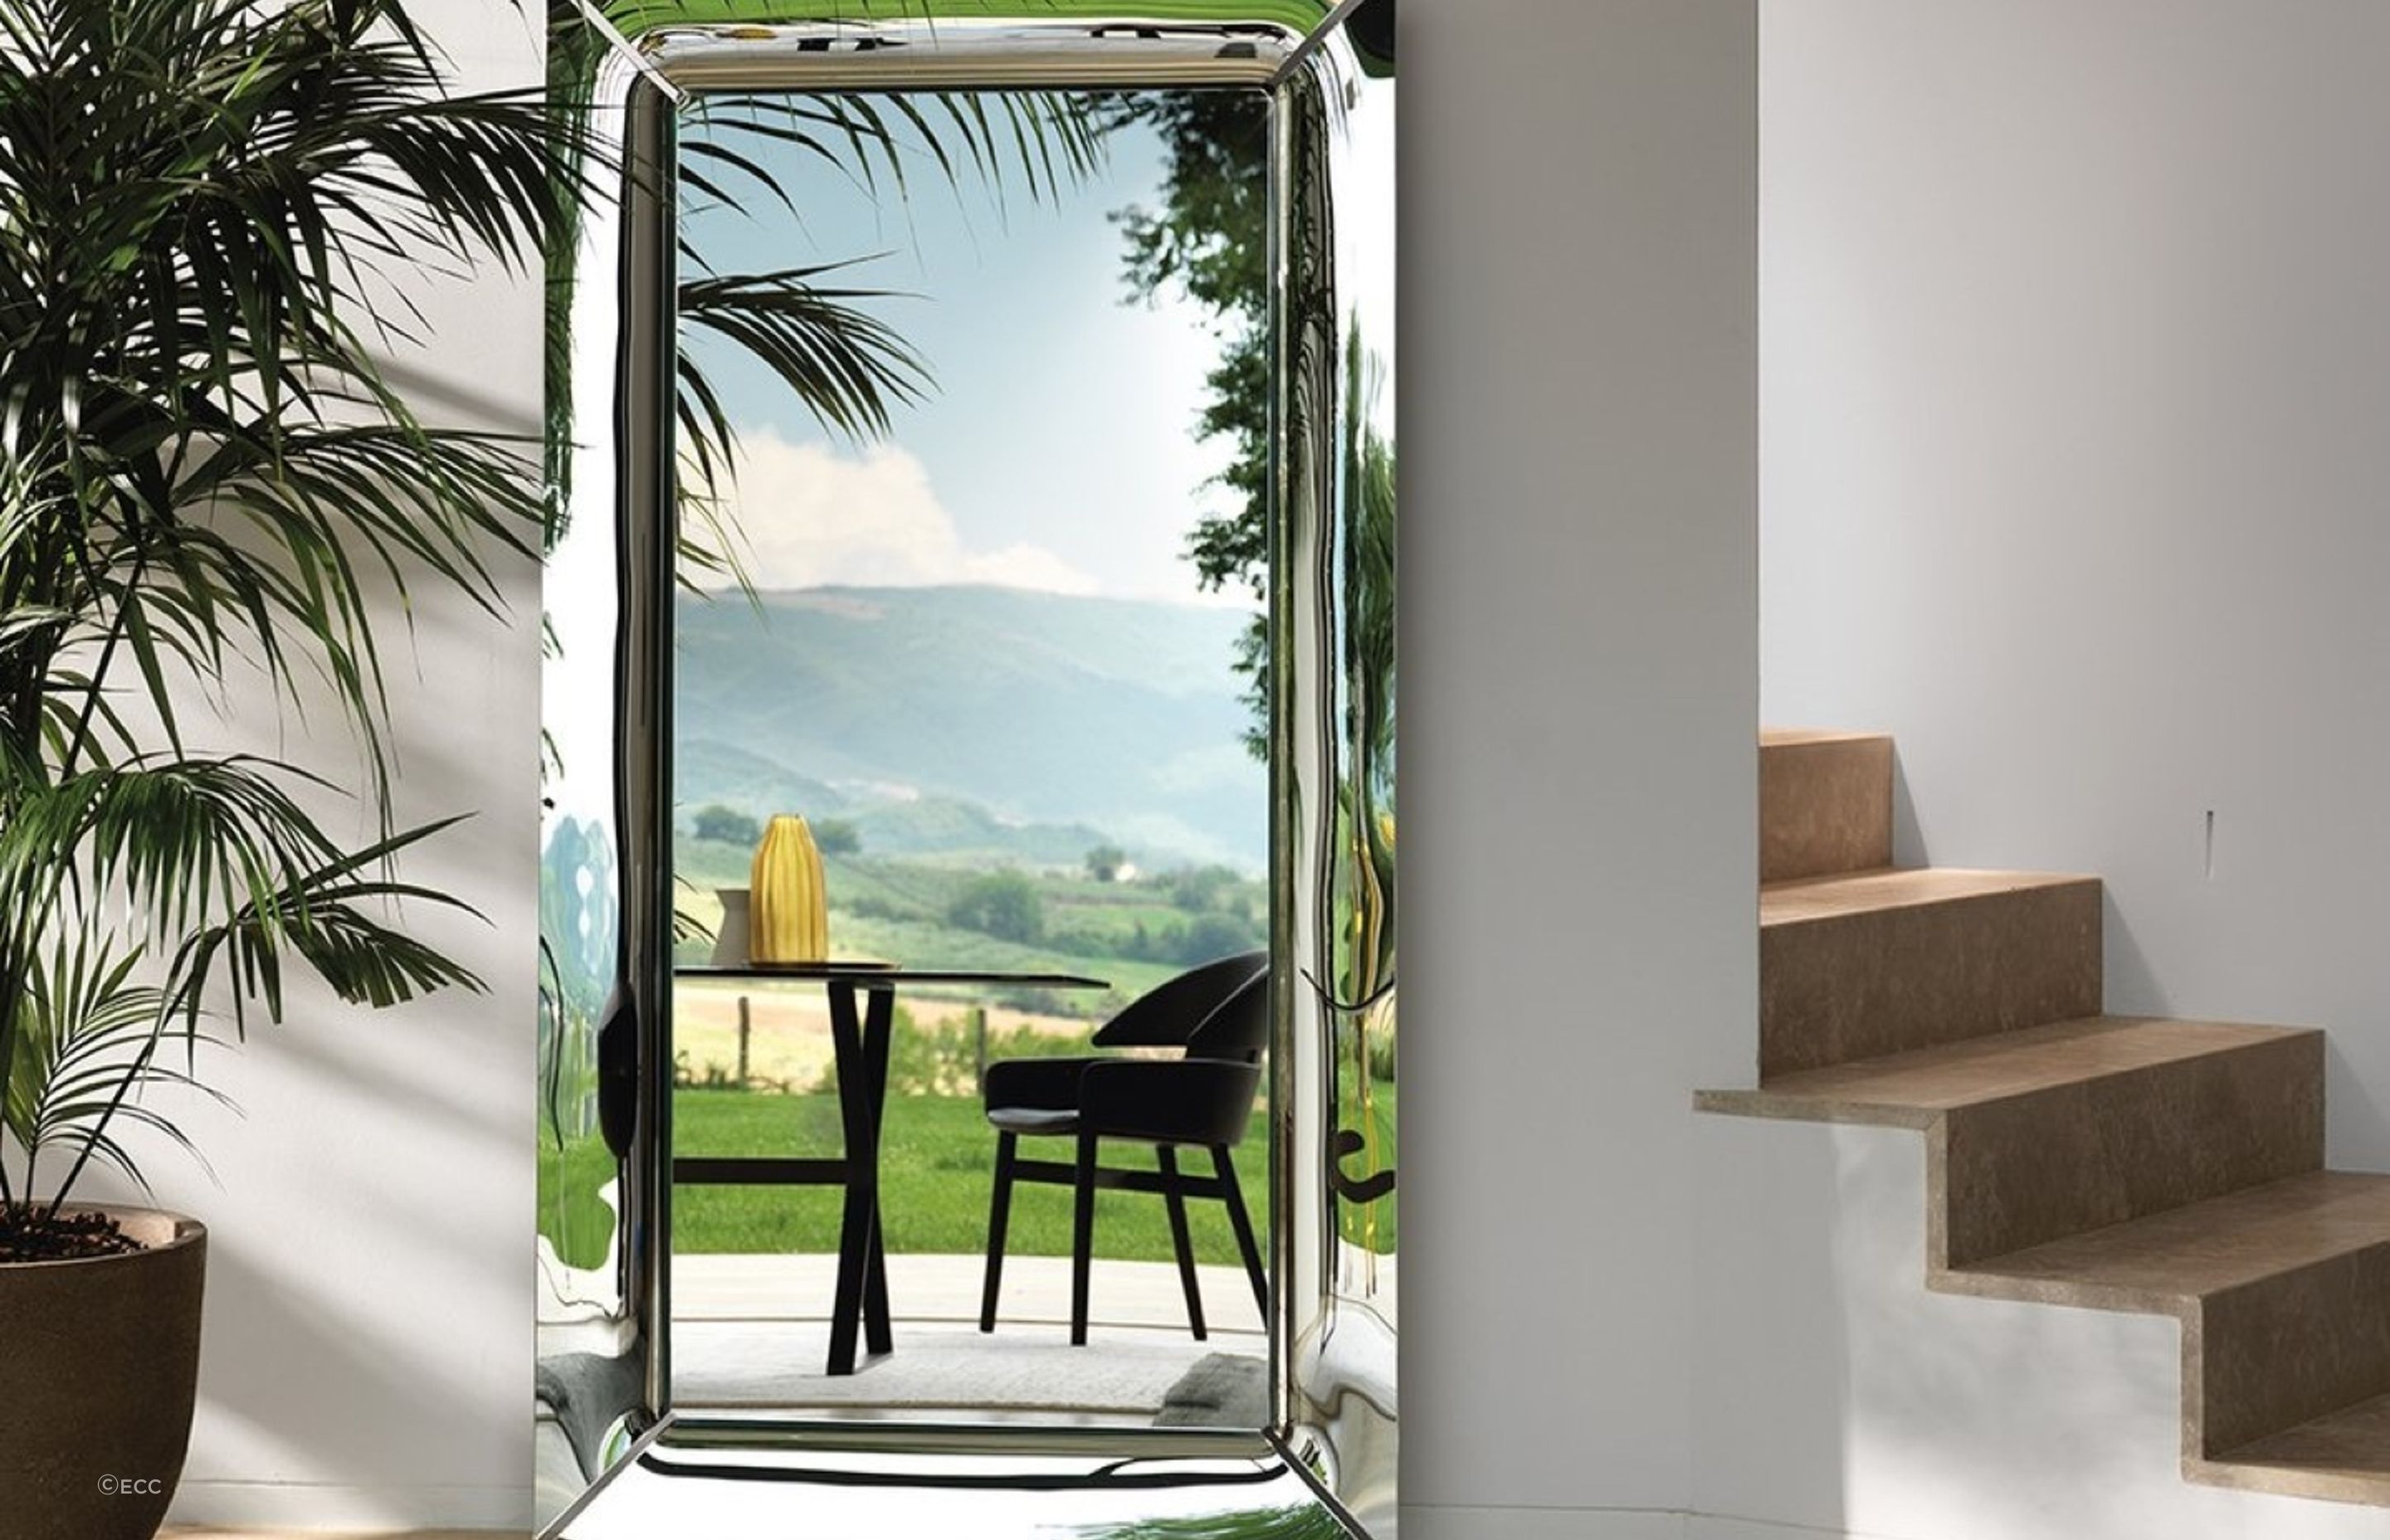 Taking advantage of an amazing view with the Caadre Freestanding Mirror.